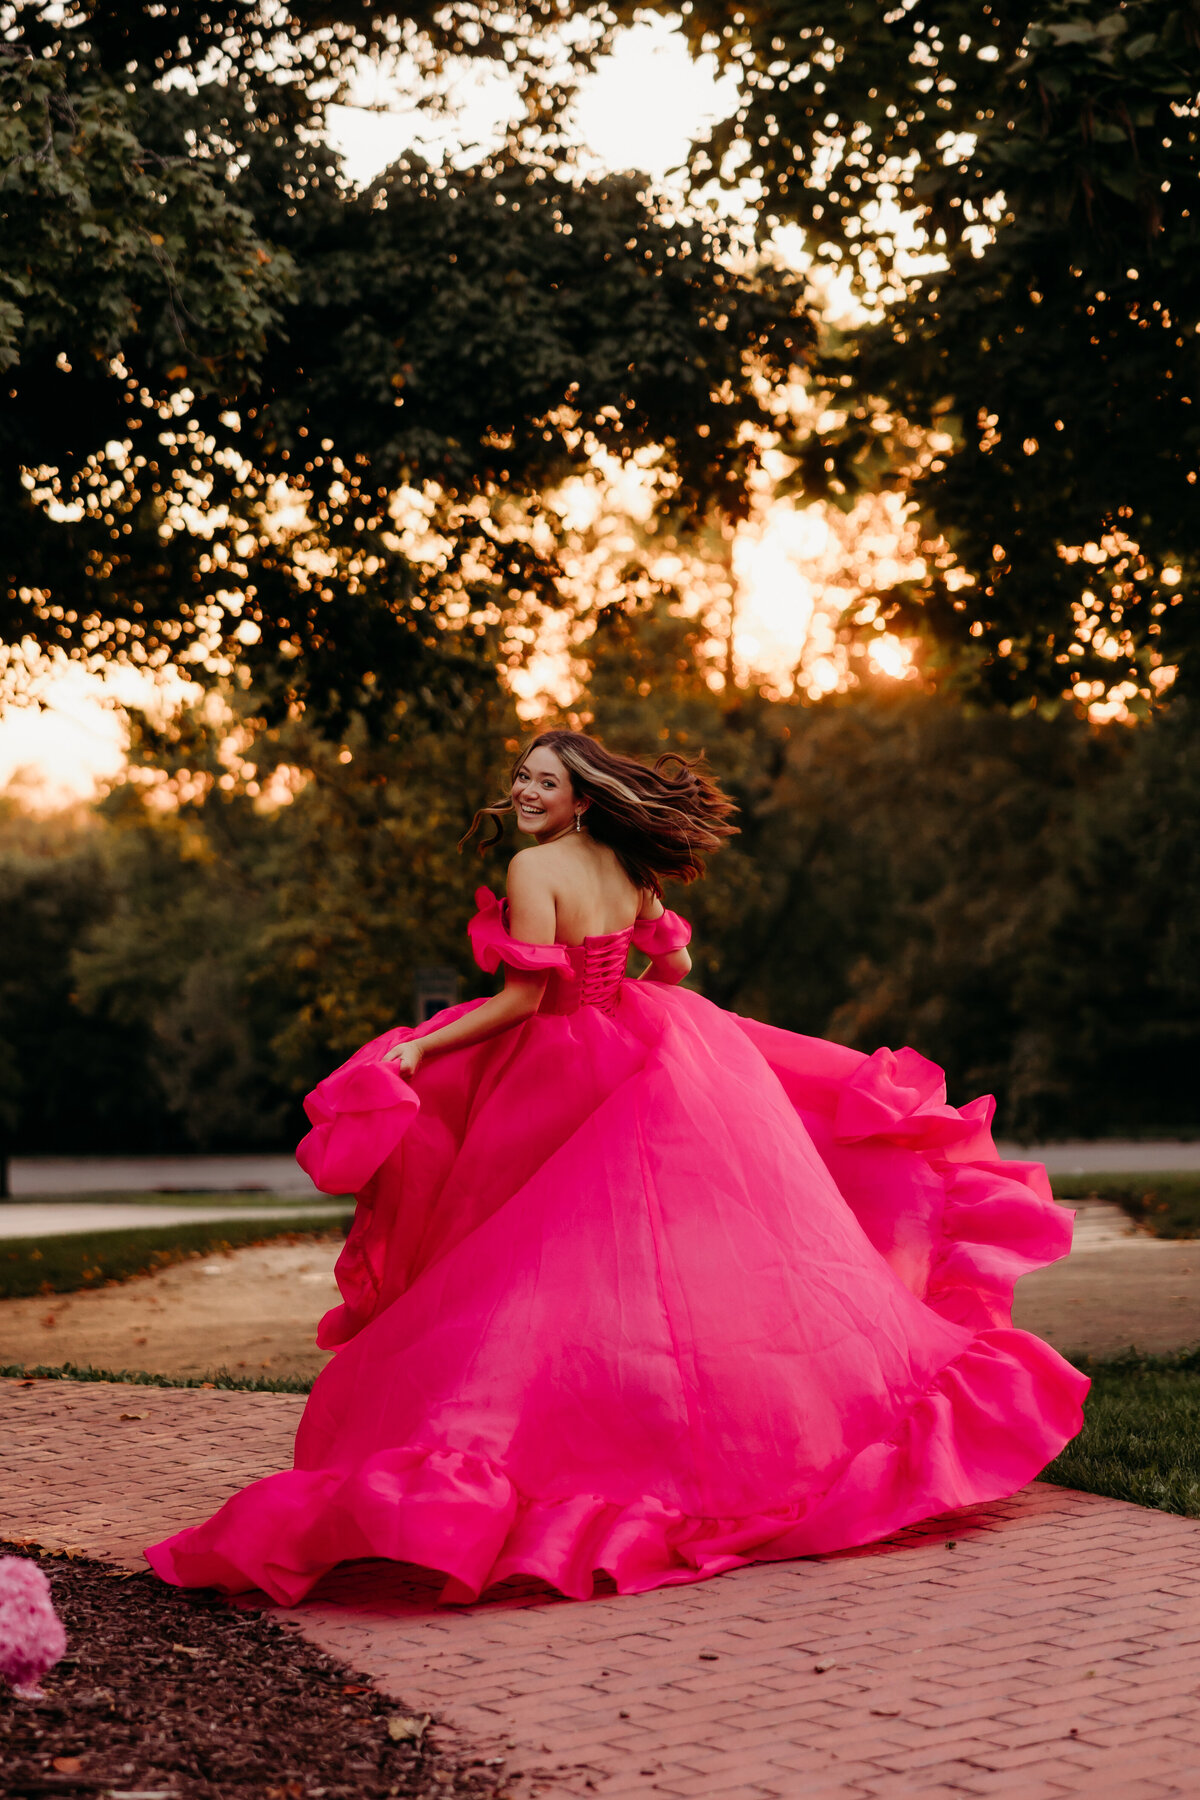 A girl in a hot pink dress runs into the sunset.